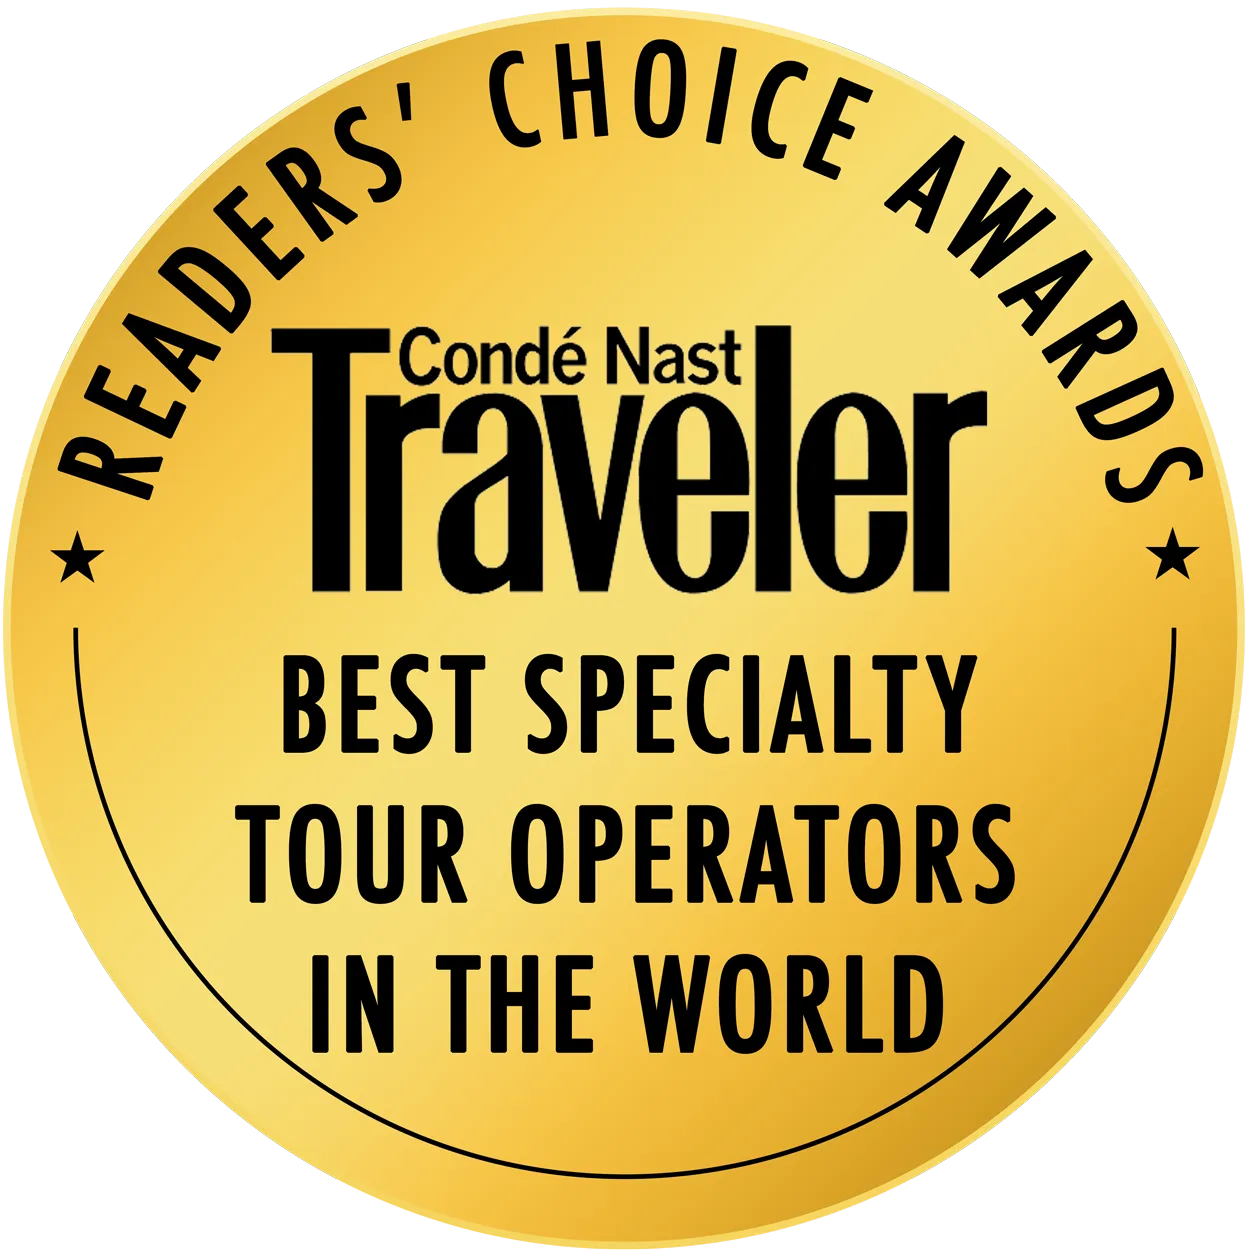 Best Specialty Tour Operators in the World